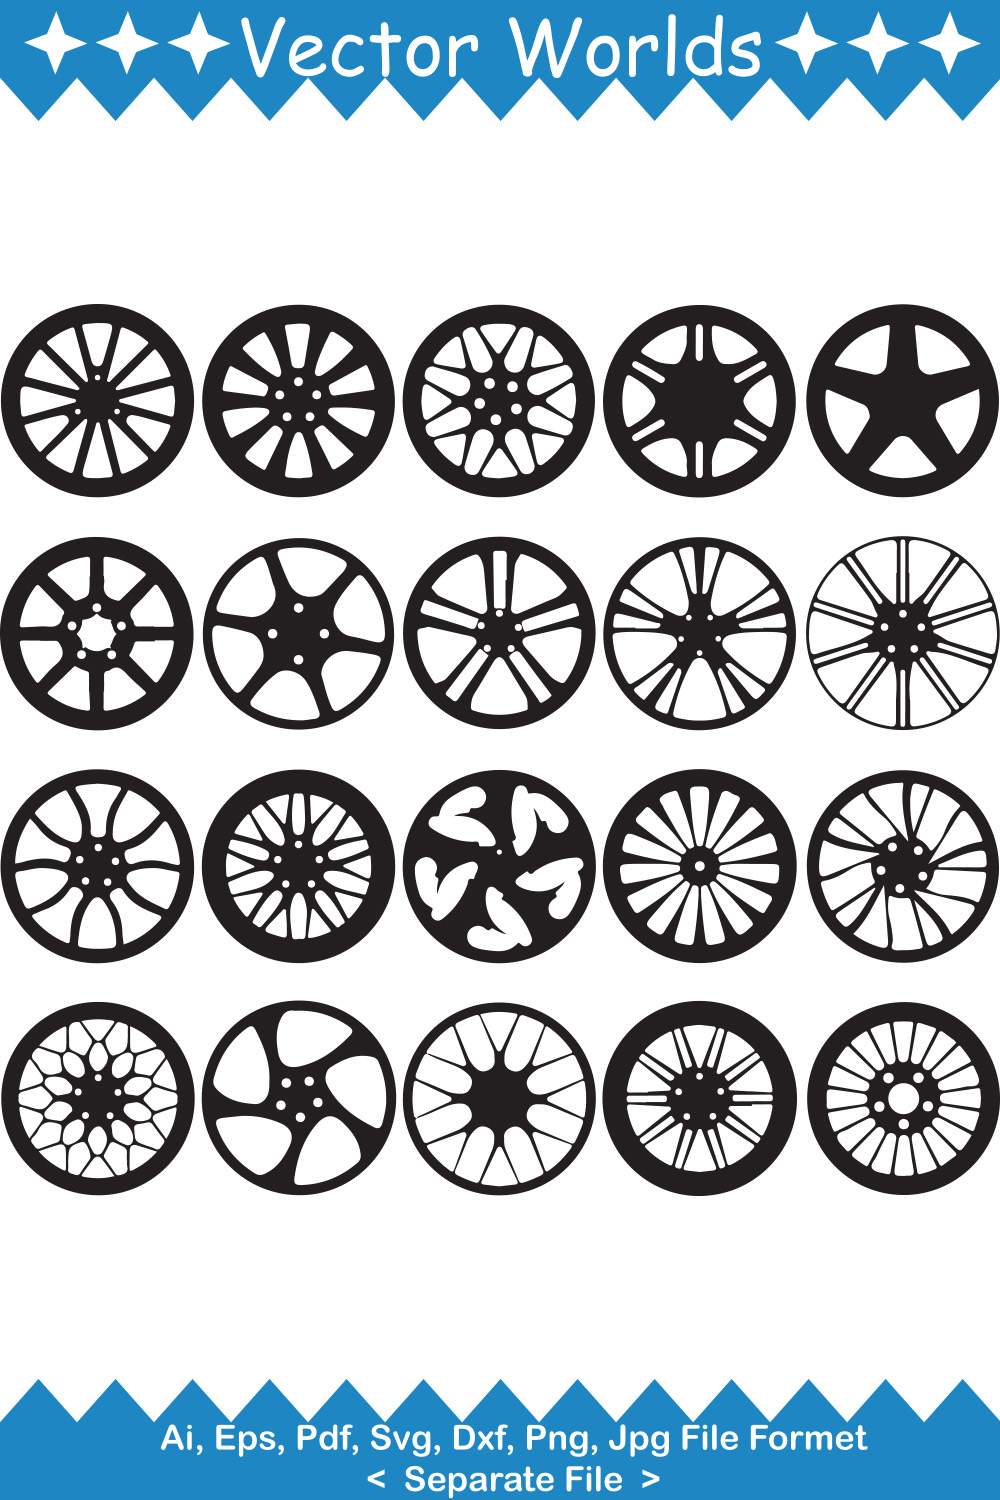 Set of adorable vector images of car wheels.